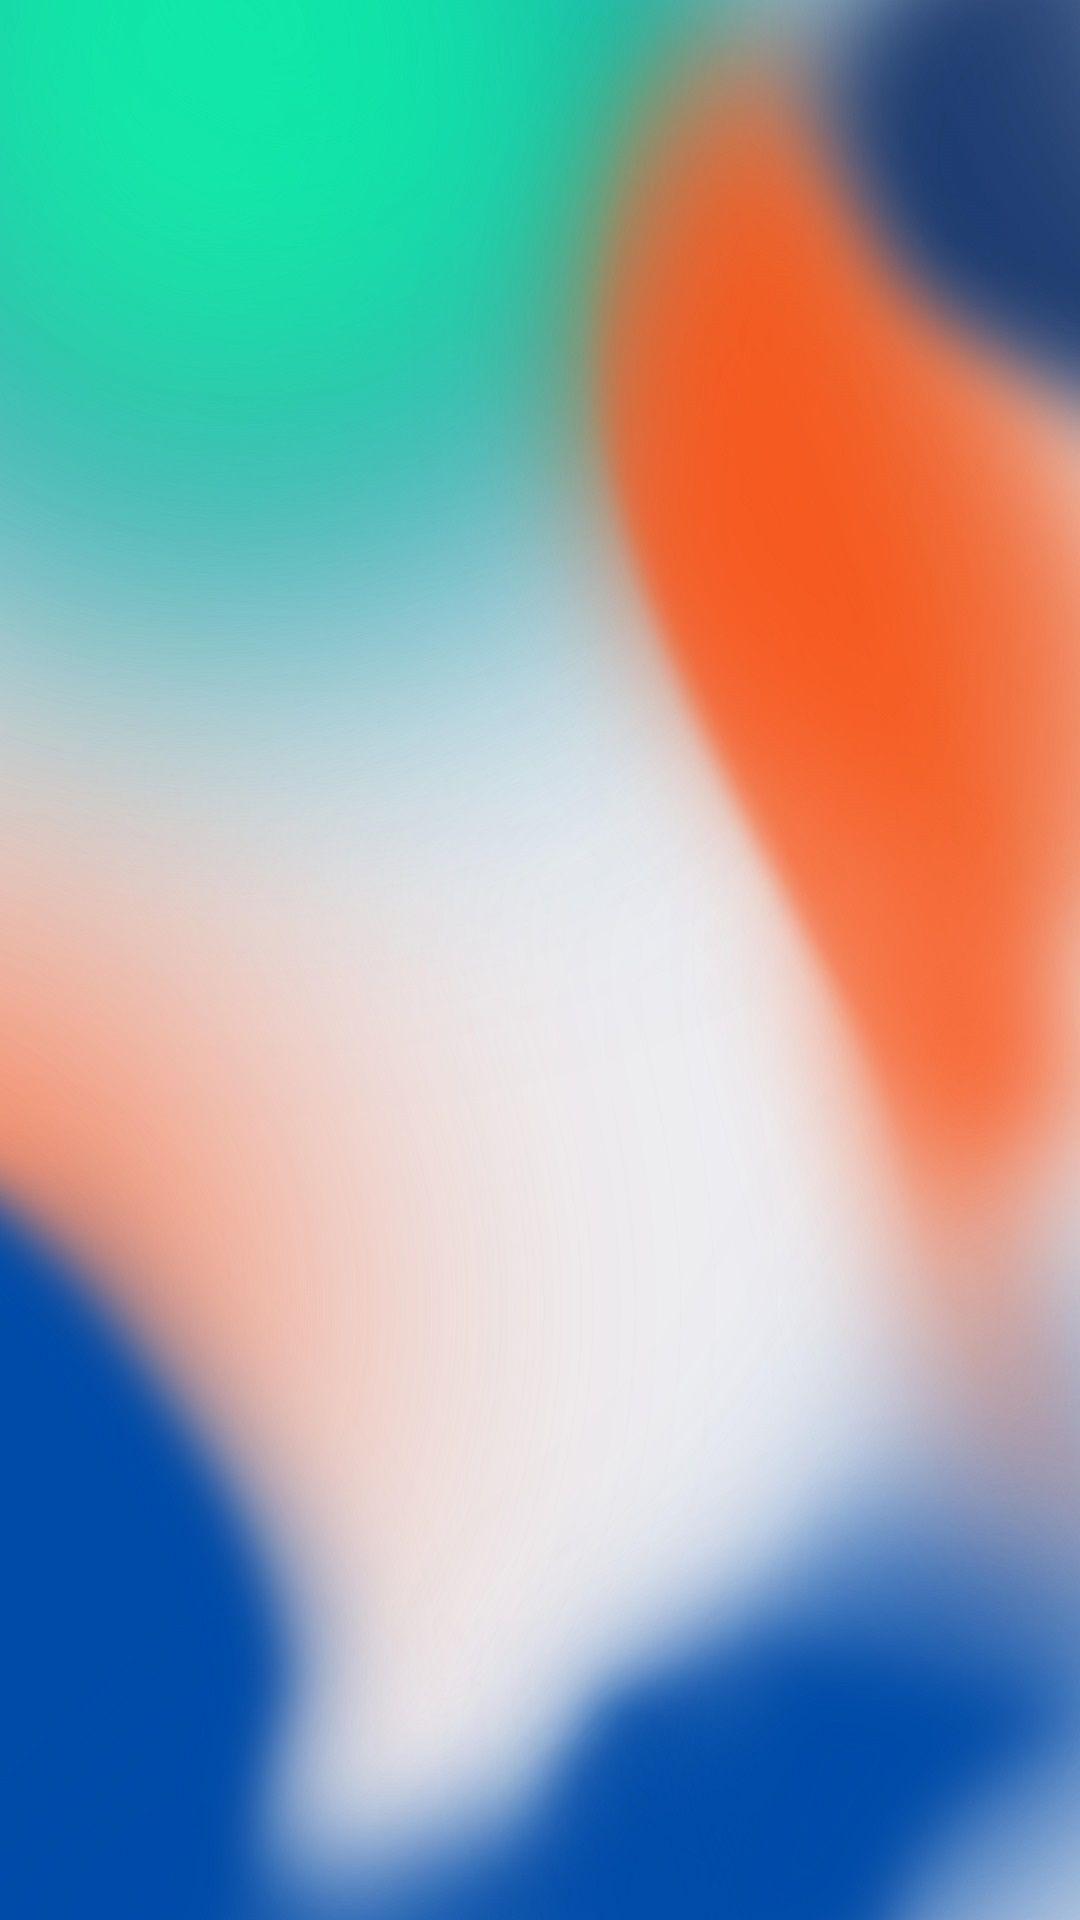 iPhone X wall 1080 x 1920 Wallpaper available for free